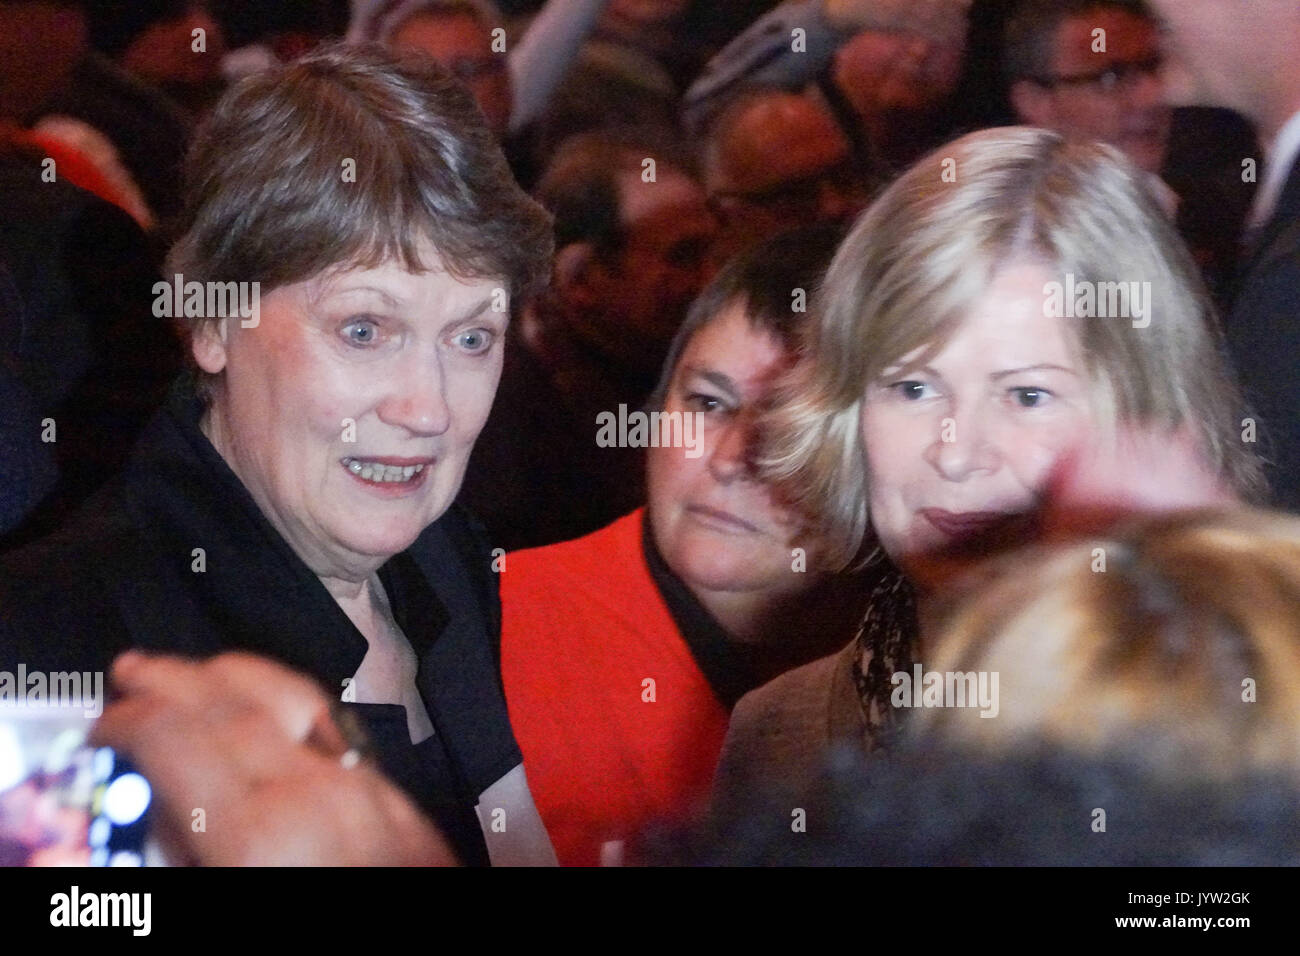 Auckland, New Zealand. 20th Aug, 2017. Former Prime Minister Helen Clark (L) attends the Labour Party's official campaign launch at Auckland Town Hall, New Zealand on Aug 20, 2017The 2017 New Zealand general election is scheduled to be held on 23 September 2017 . The current government is National Party. Credit: Shirley Kwok/Pacific Press/Alamy Live News Stock Photo